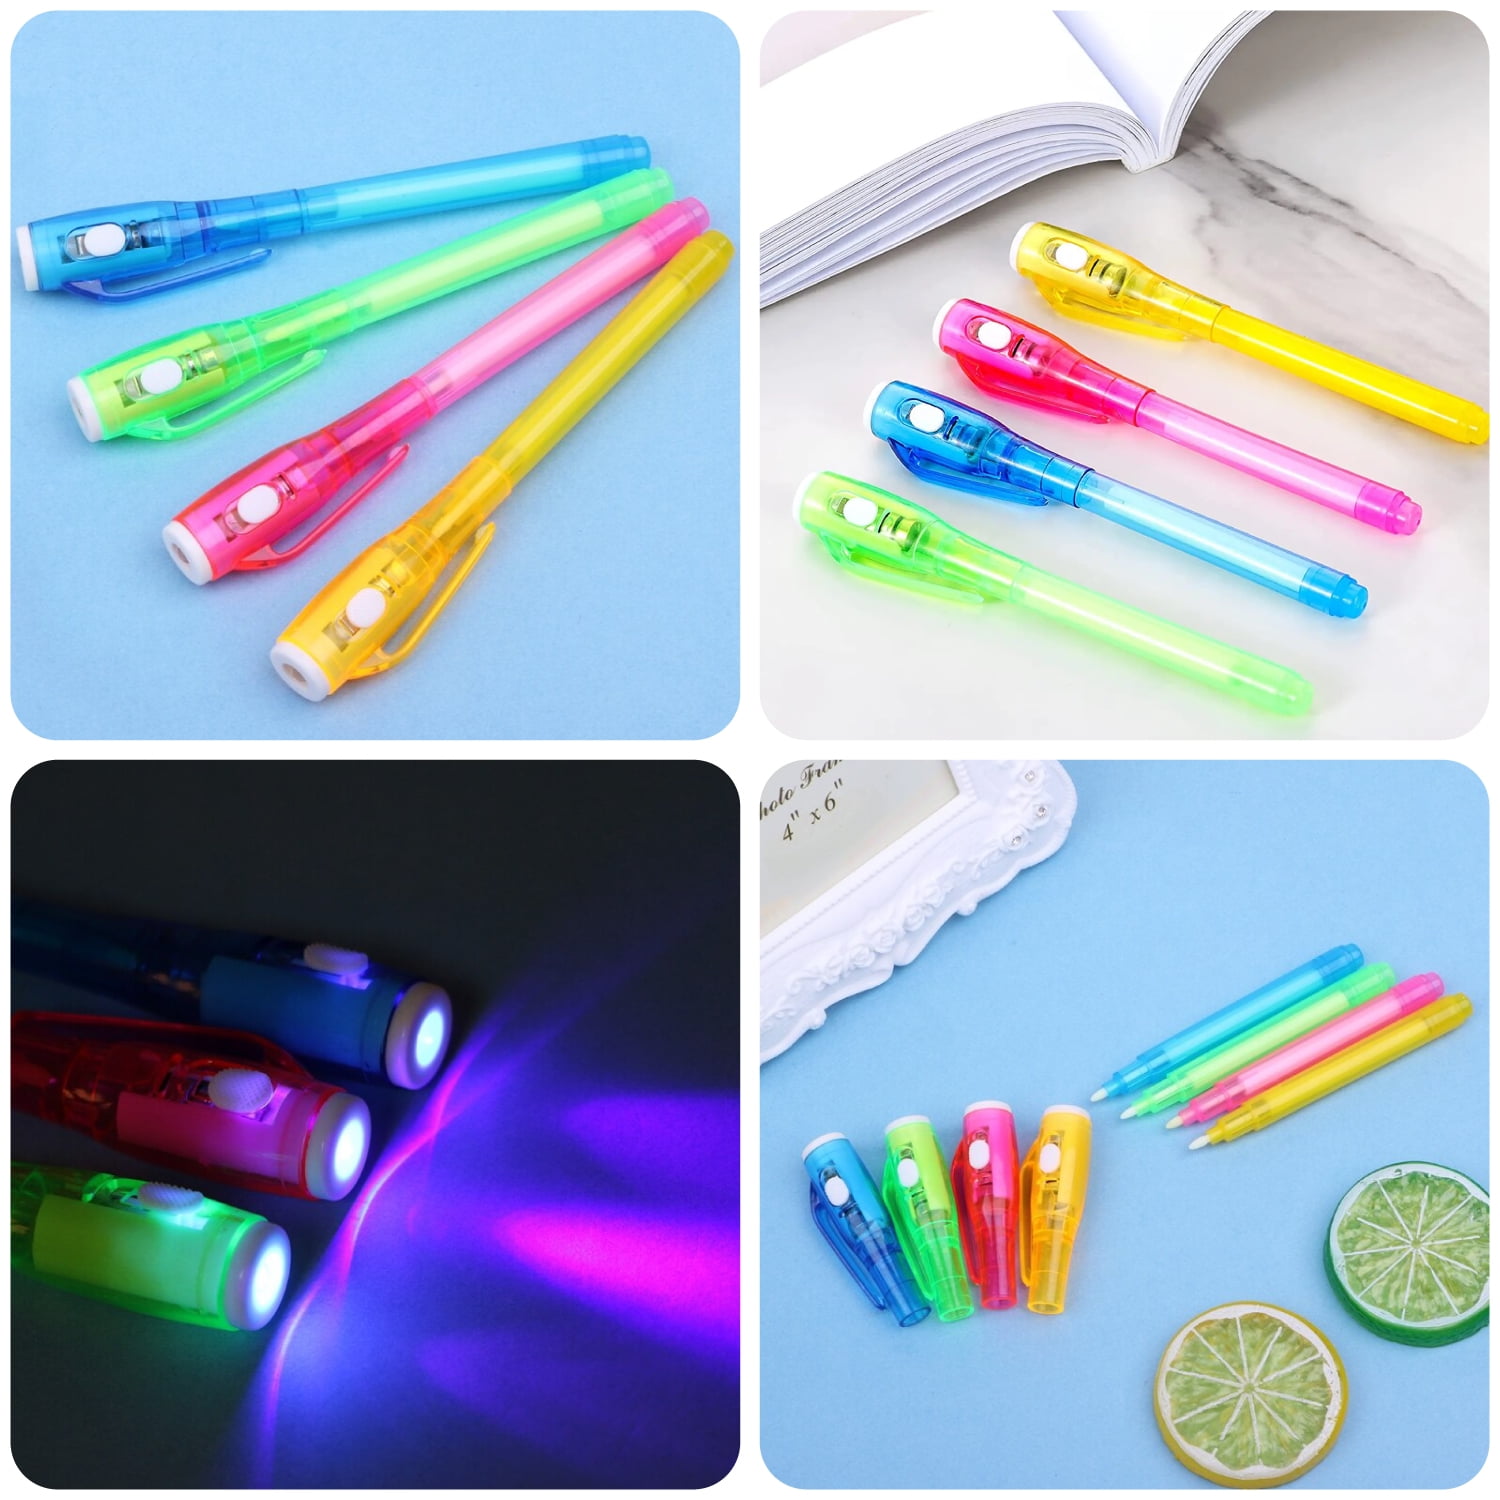  DazSpirit 20PCS Invisible Ink Pens with UV Light Party Bag  Fillers for Boys and Girls, Magic Pen Disappearing Ink Pen for Kids, UV Pen  for Writing Secret Message, Christmas Birthday Gifts 